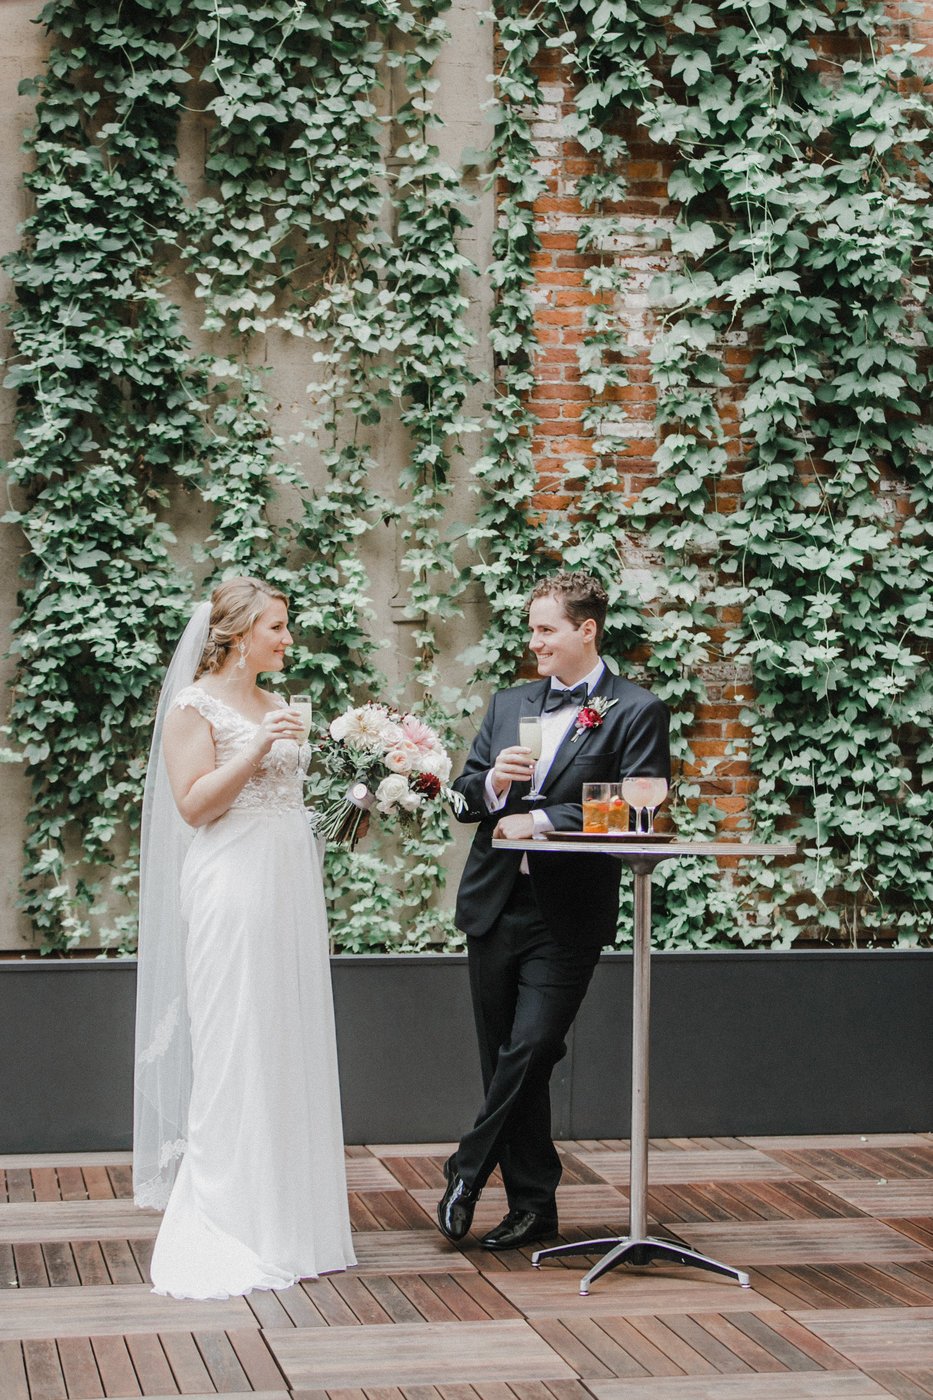 Bride and groom sipping cocktails in front of a green wall in the Garden Courtyard of Excelsior